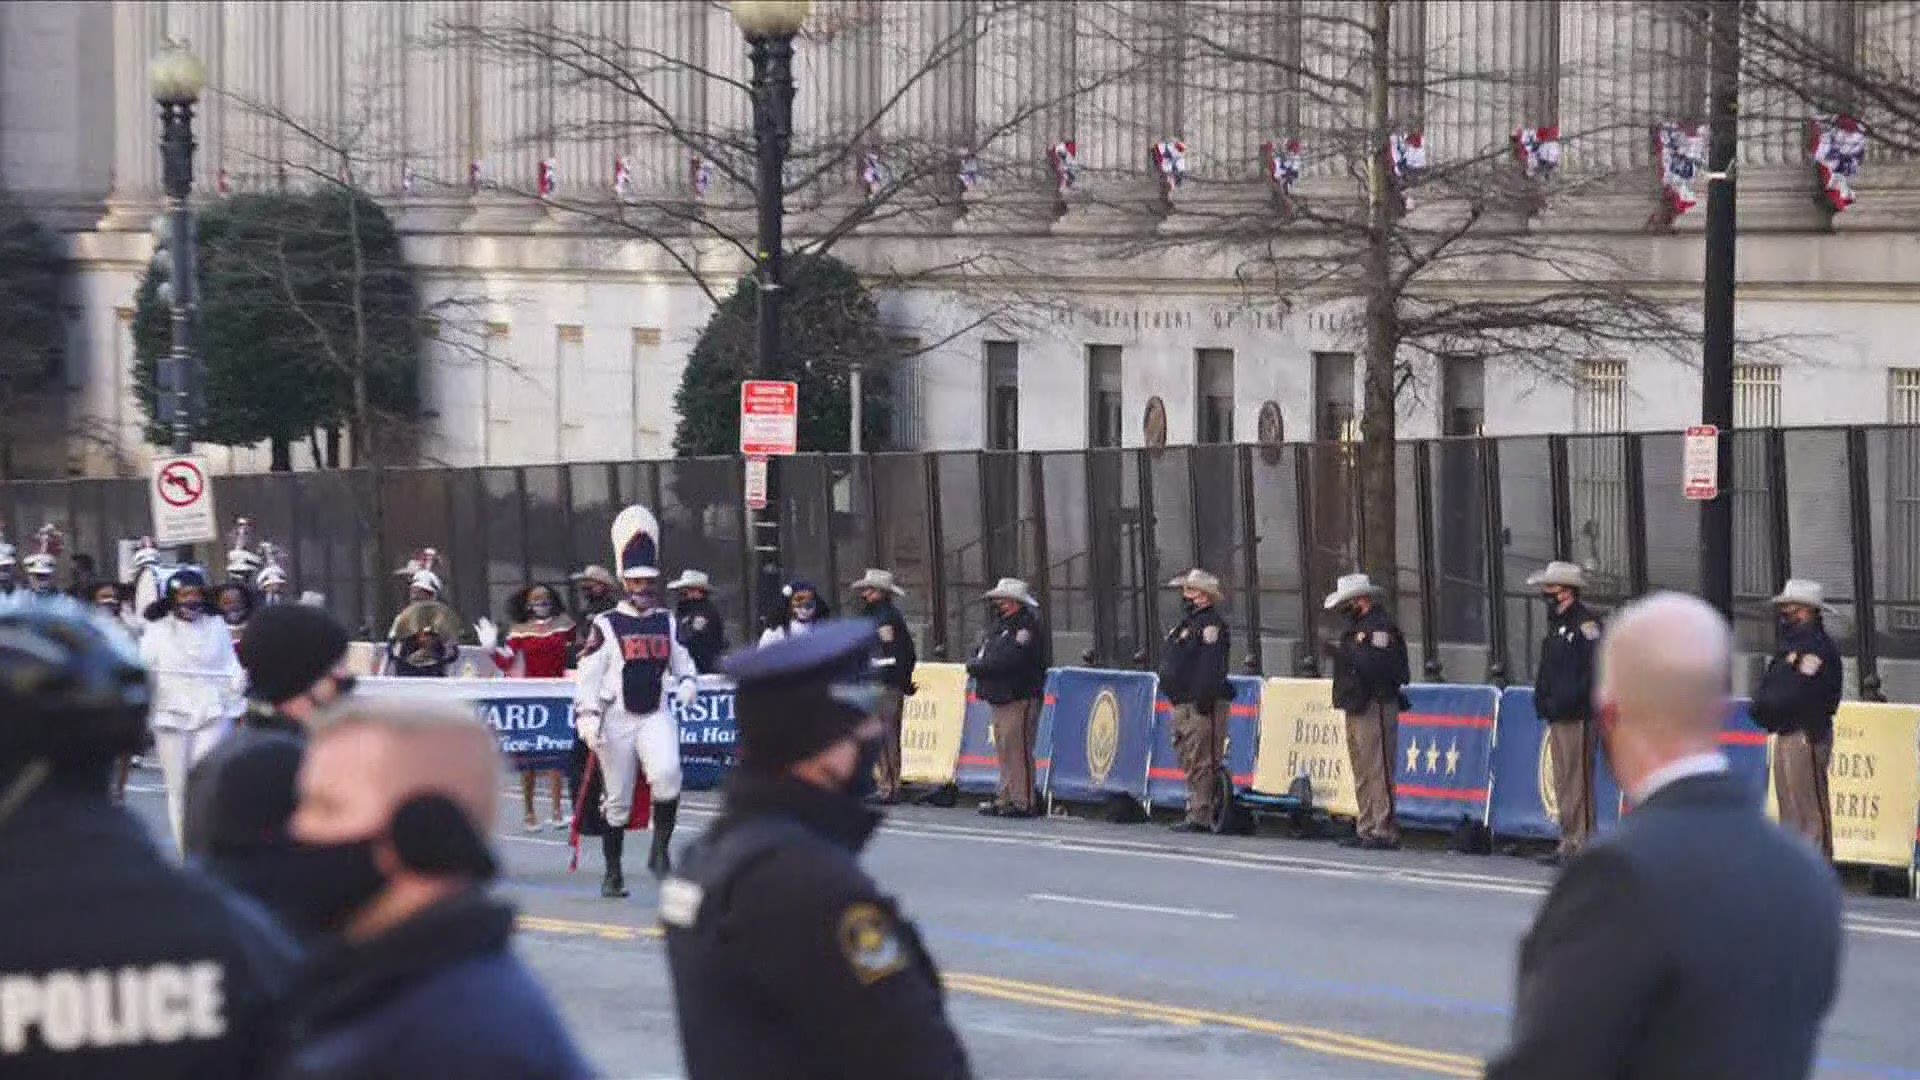 Howard University's "Showtime" Marching Band performs during the inauguration parade that is a part of the Presidential Escort through the streets of Washington DC.